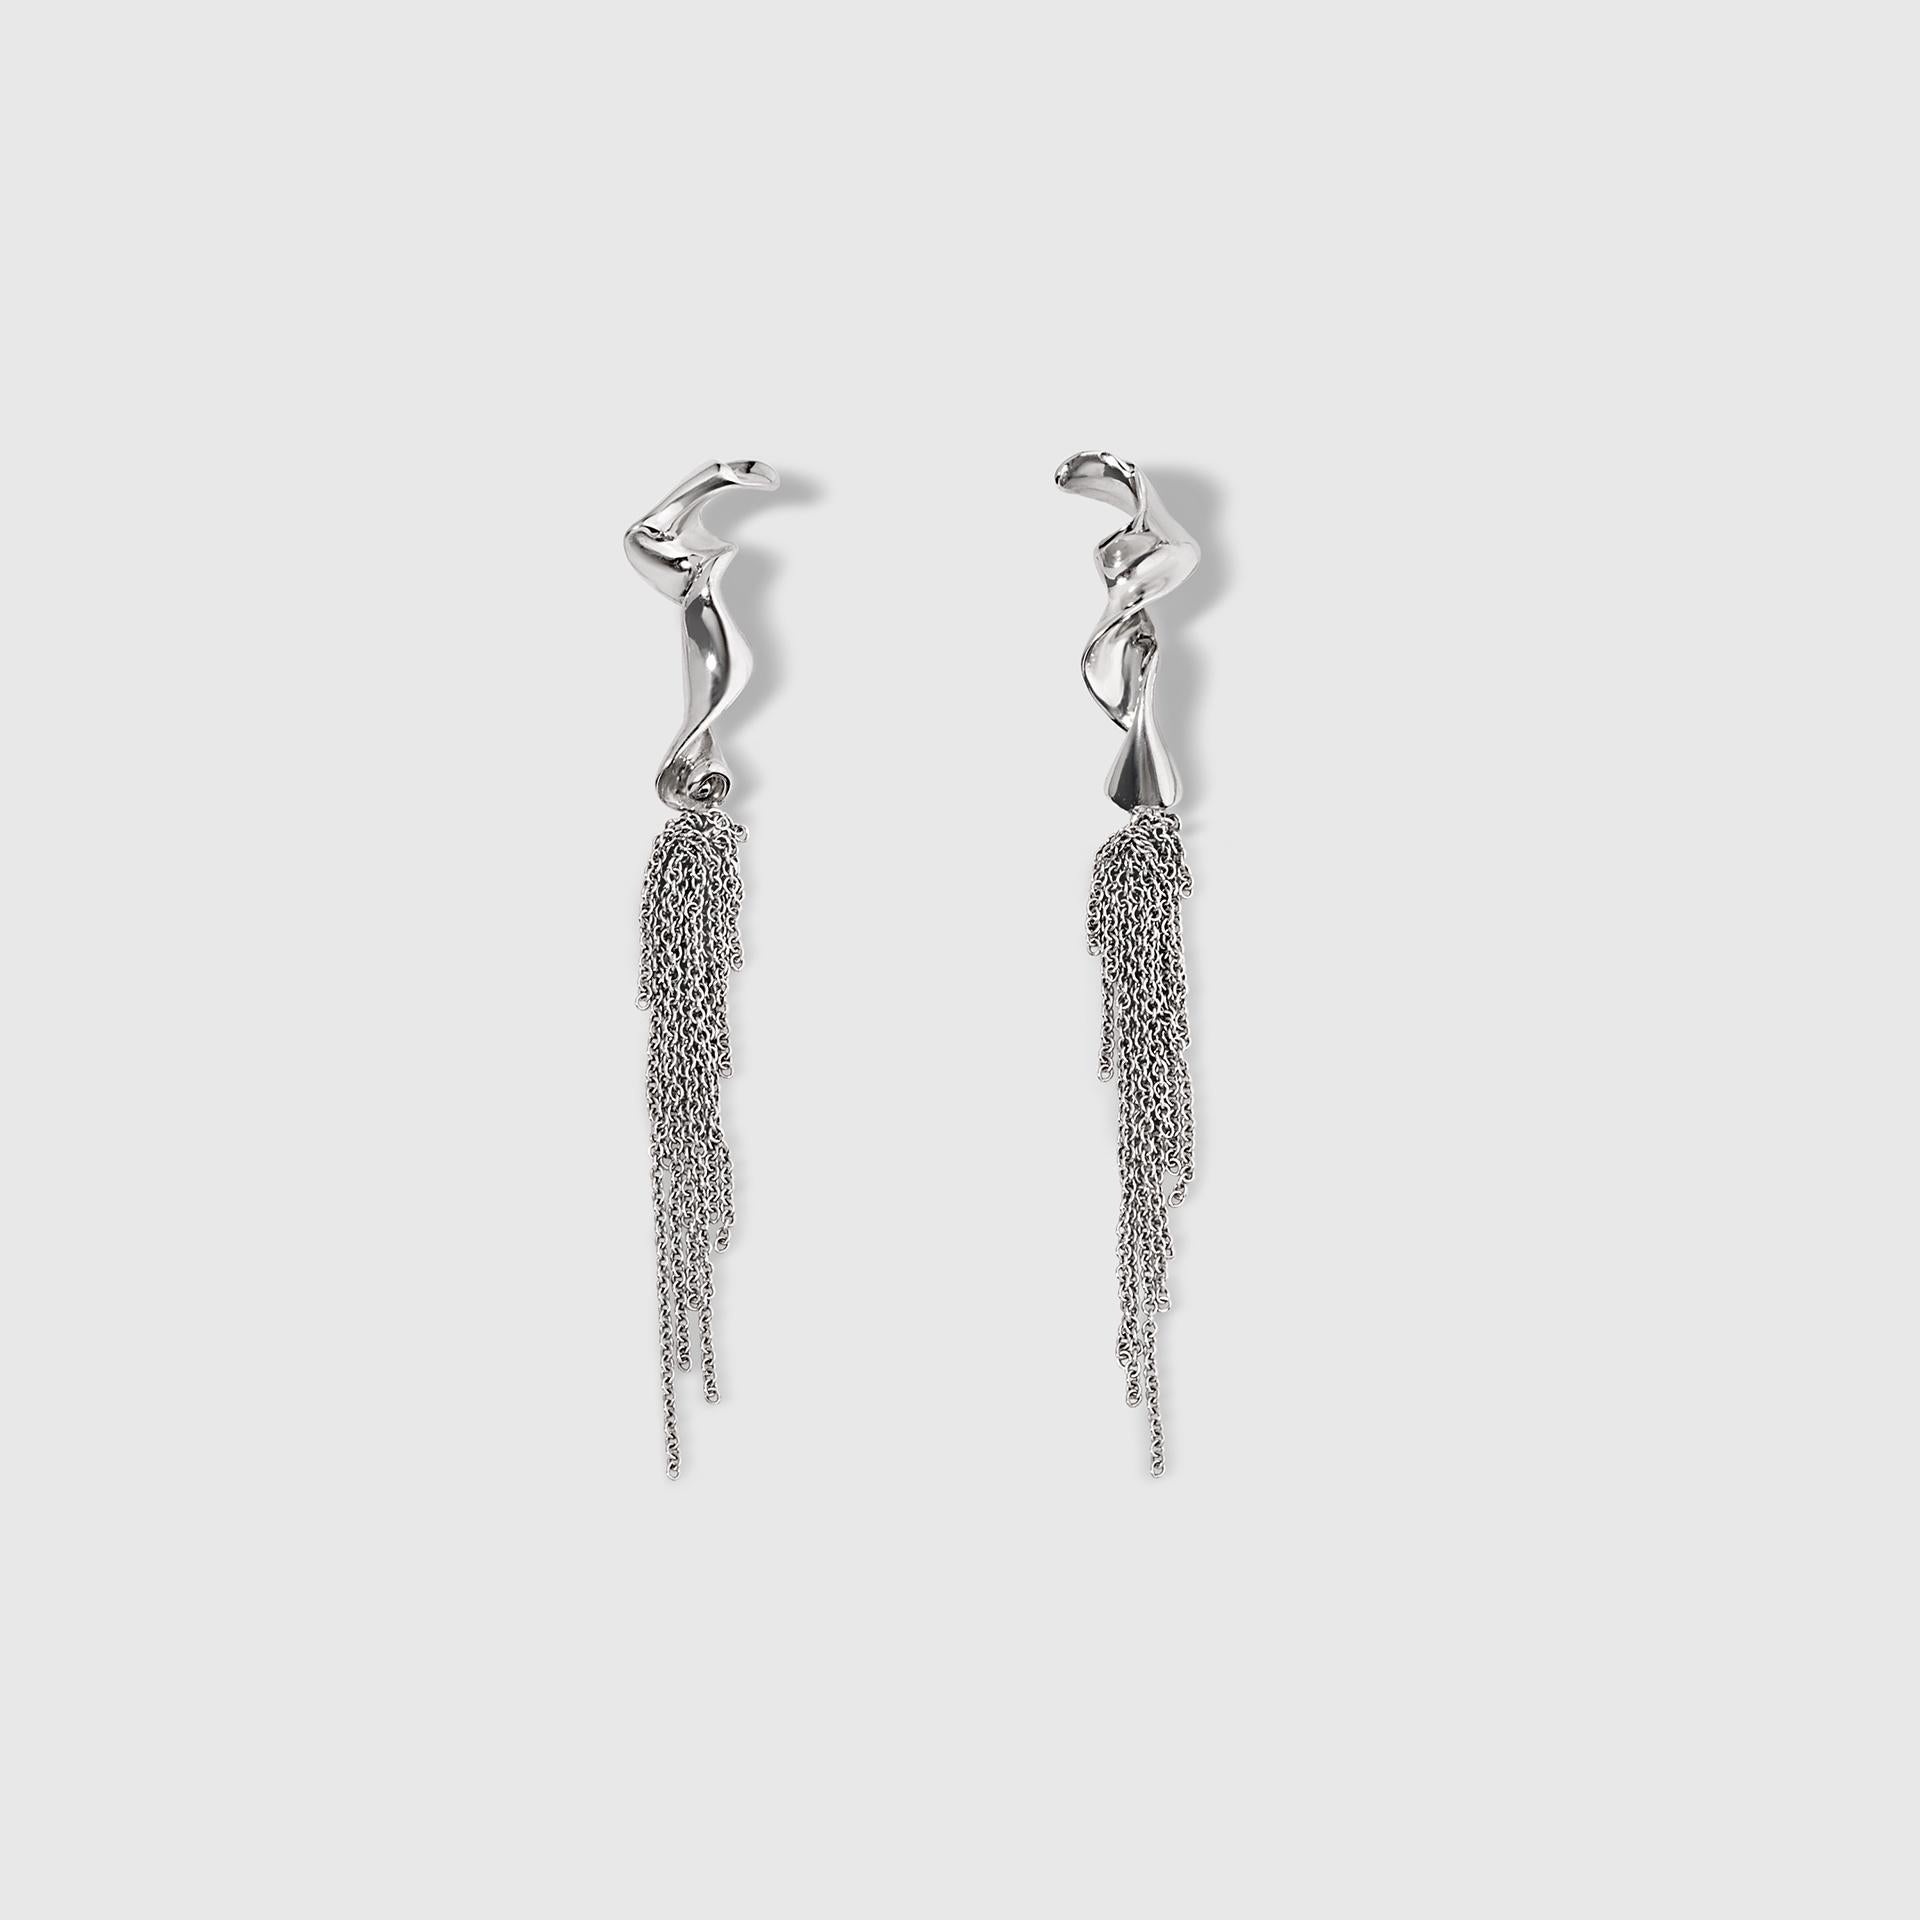 Sculptural Modern Couture 14K White Gold Earrings with Gold Chain Fringe Detail
Approximately 3” in length. These delicate and sculptural earrings can go from day to night.  Curving sculptural earrings with high polished finish.  Handmade in Los